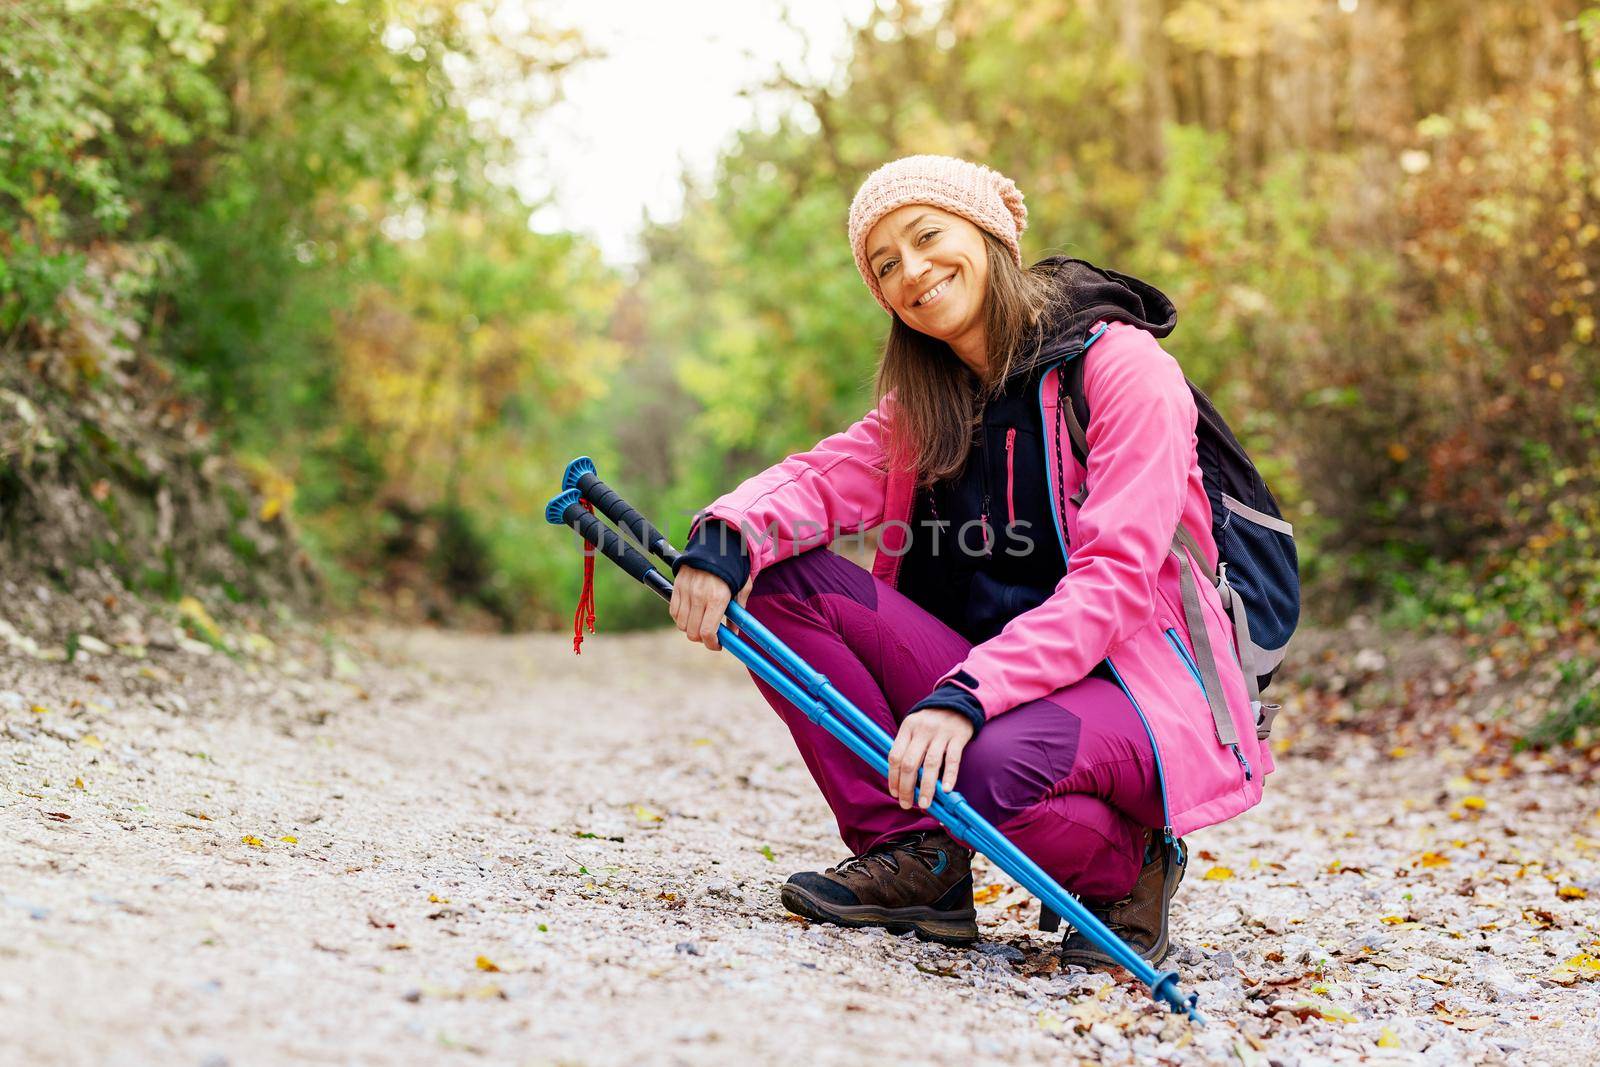 Hiker girl crouching on a wide trail in the mountains. Backpacker with pink jacket in a forest. Healthy fitness lifestyle outdoors. by kokimk